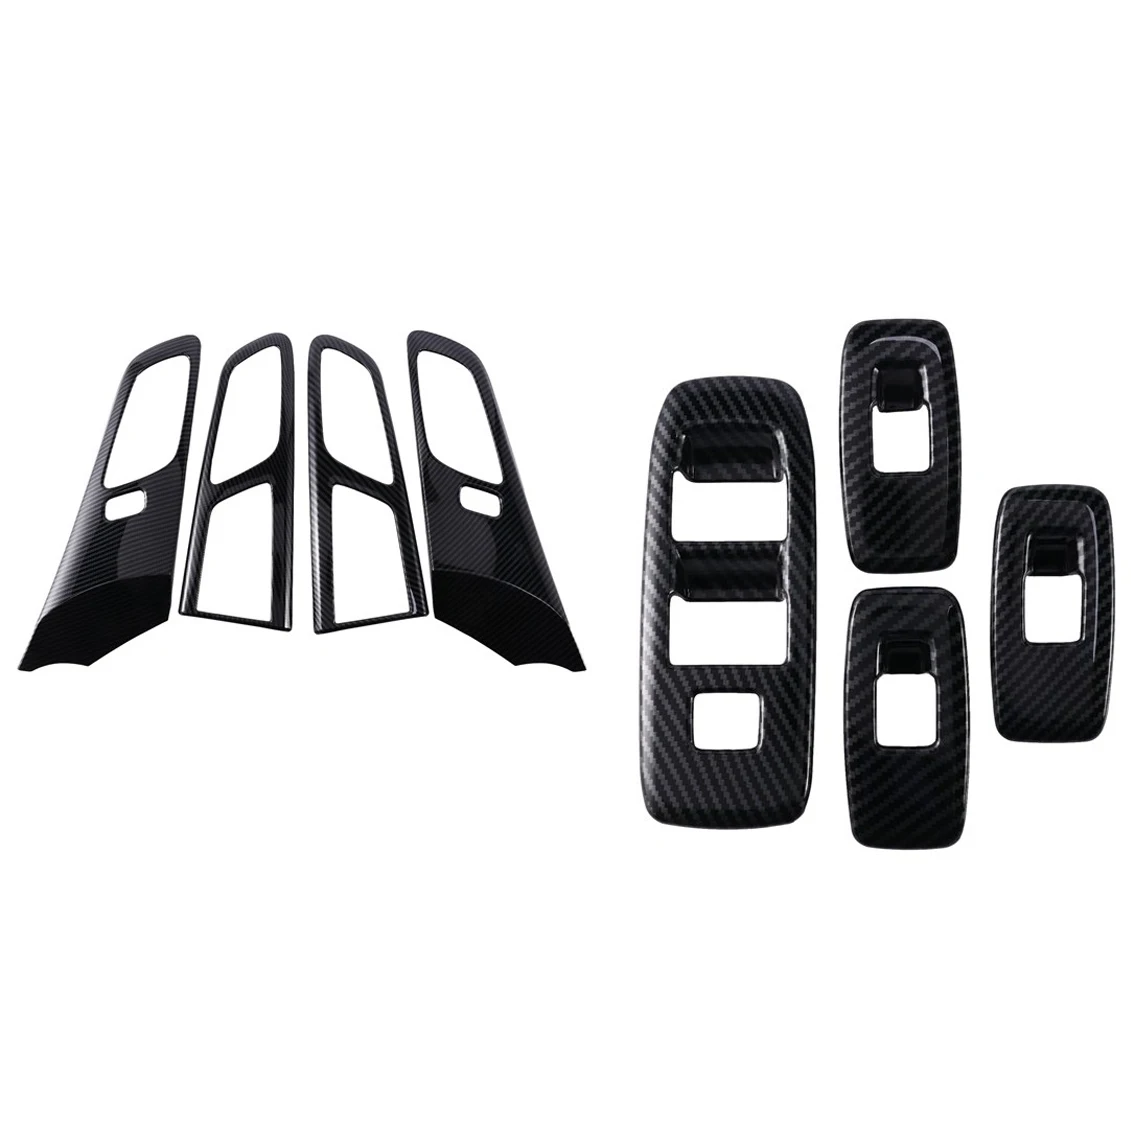 For Ford Ranger Everest Endeavour 2015+ Inner Door Handle & Window Lift Switch Panel Cover Trim Accessories,Carbon Fiber